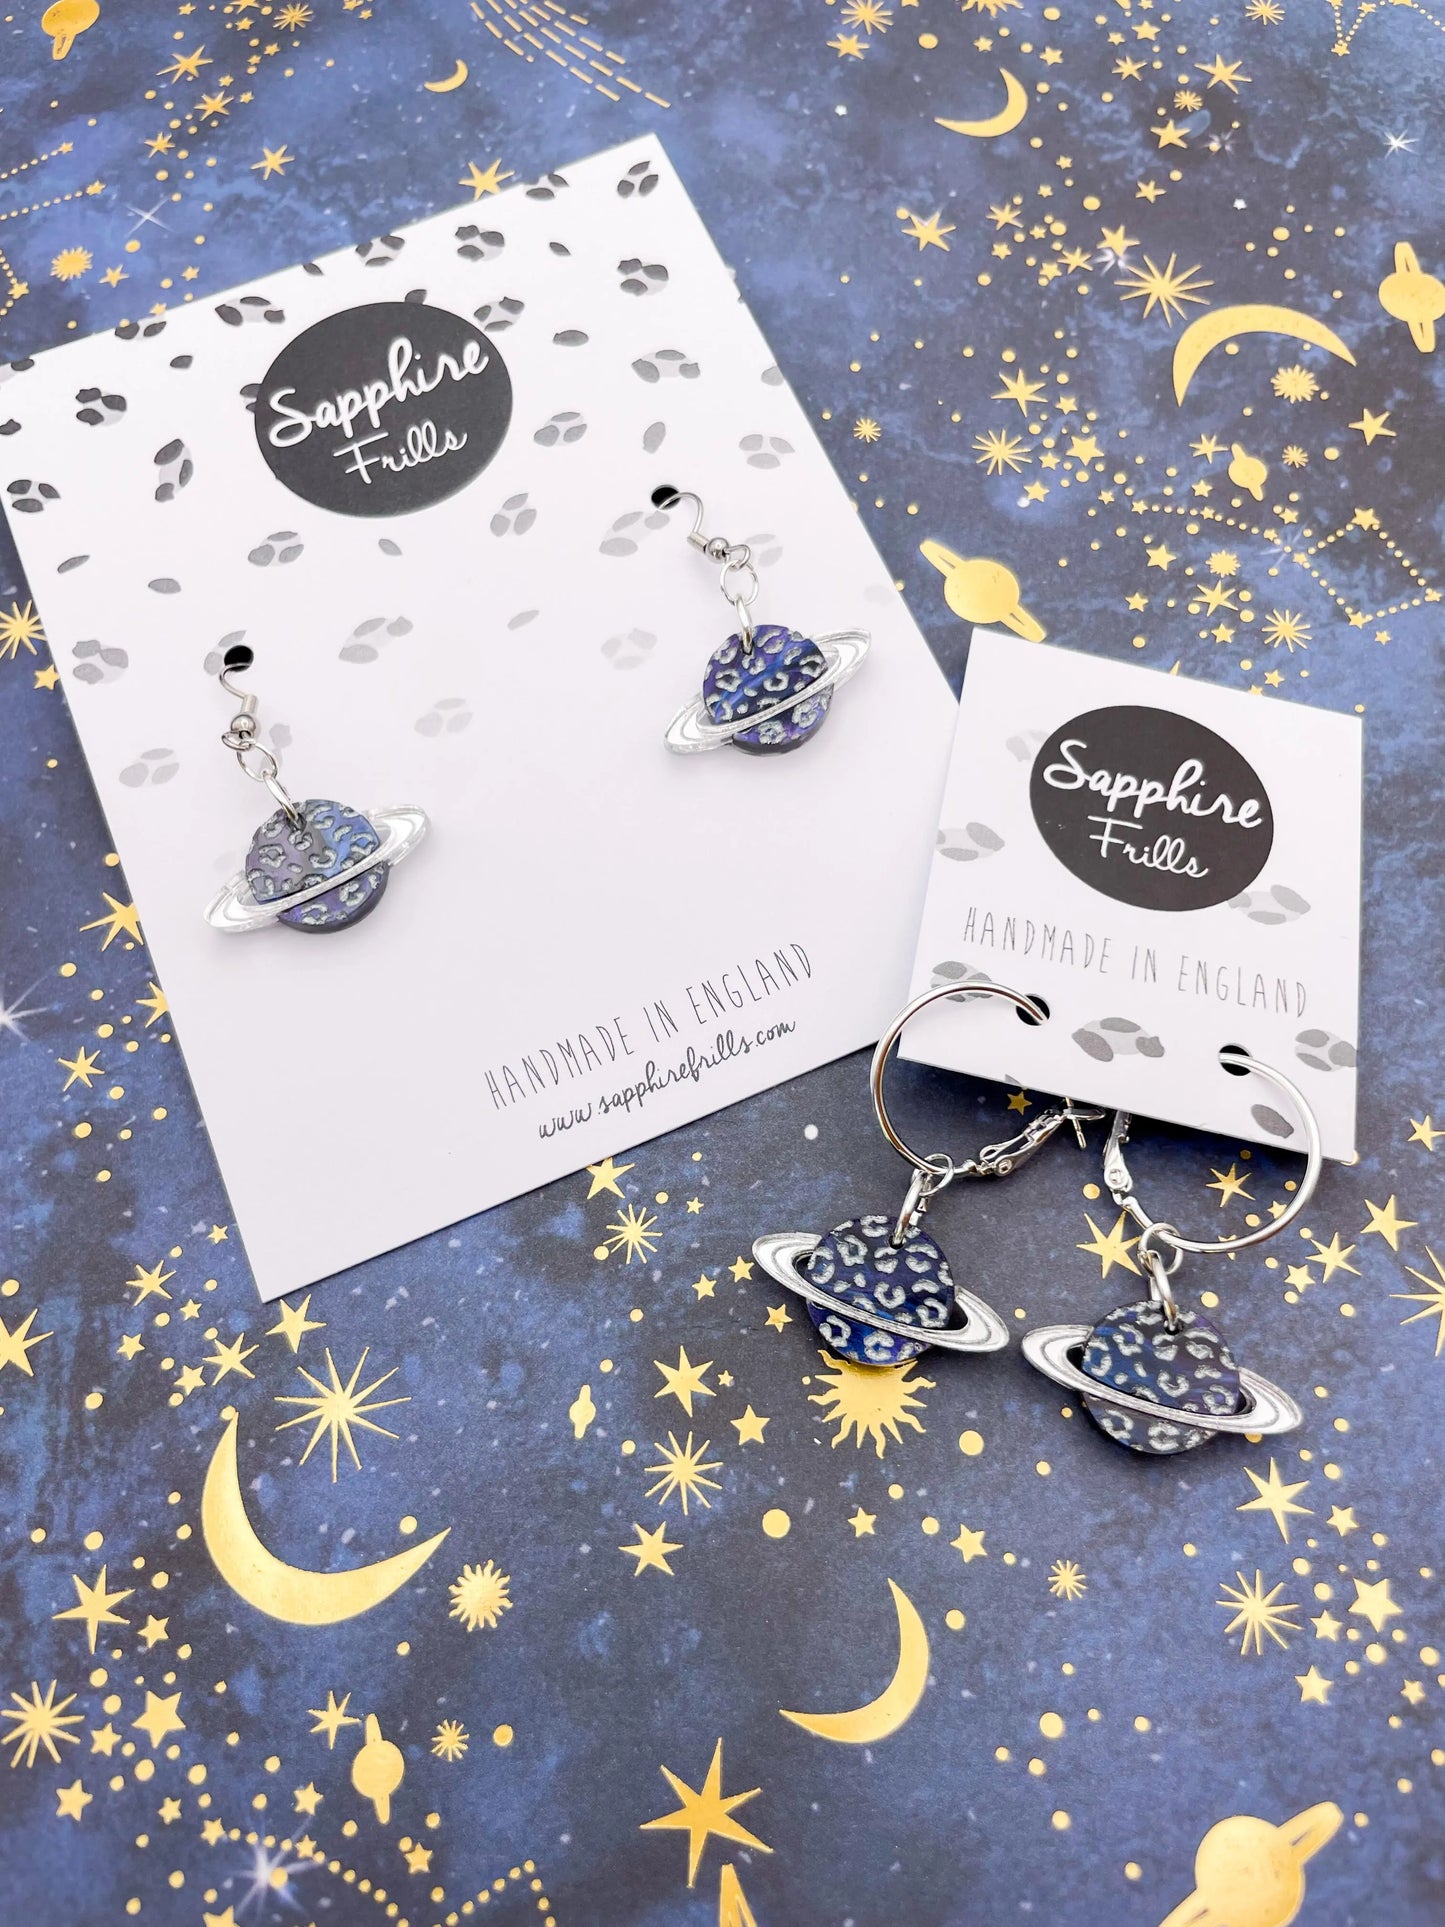 Medium Silver Night Sky Marble Acrylic Leopard Print Planet Dangle Earrings from Sapphire Frills